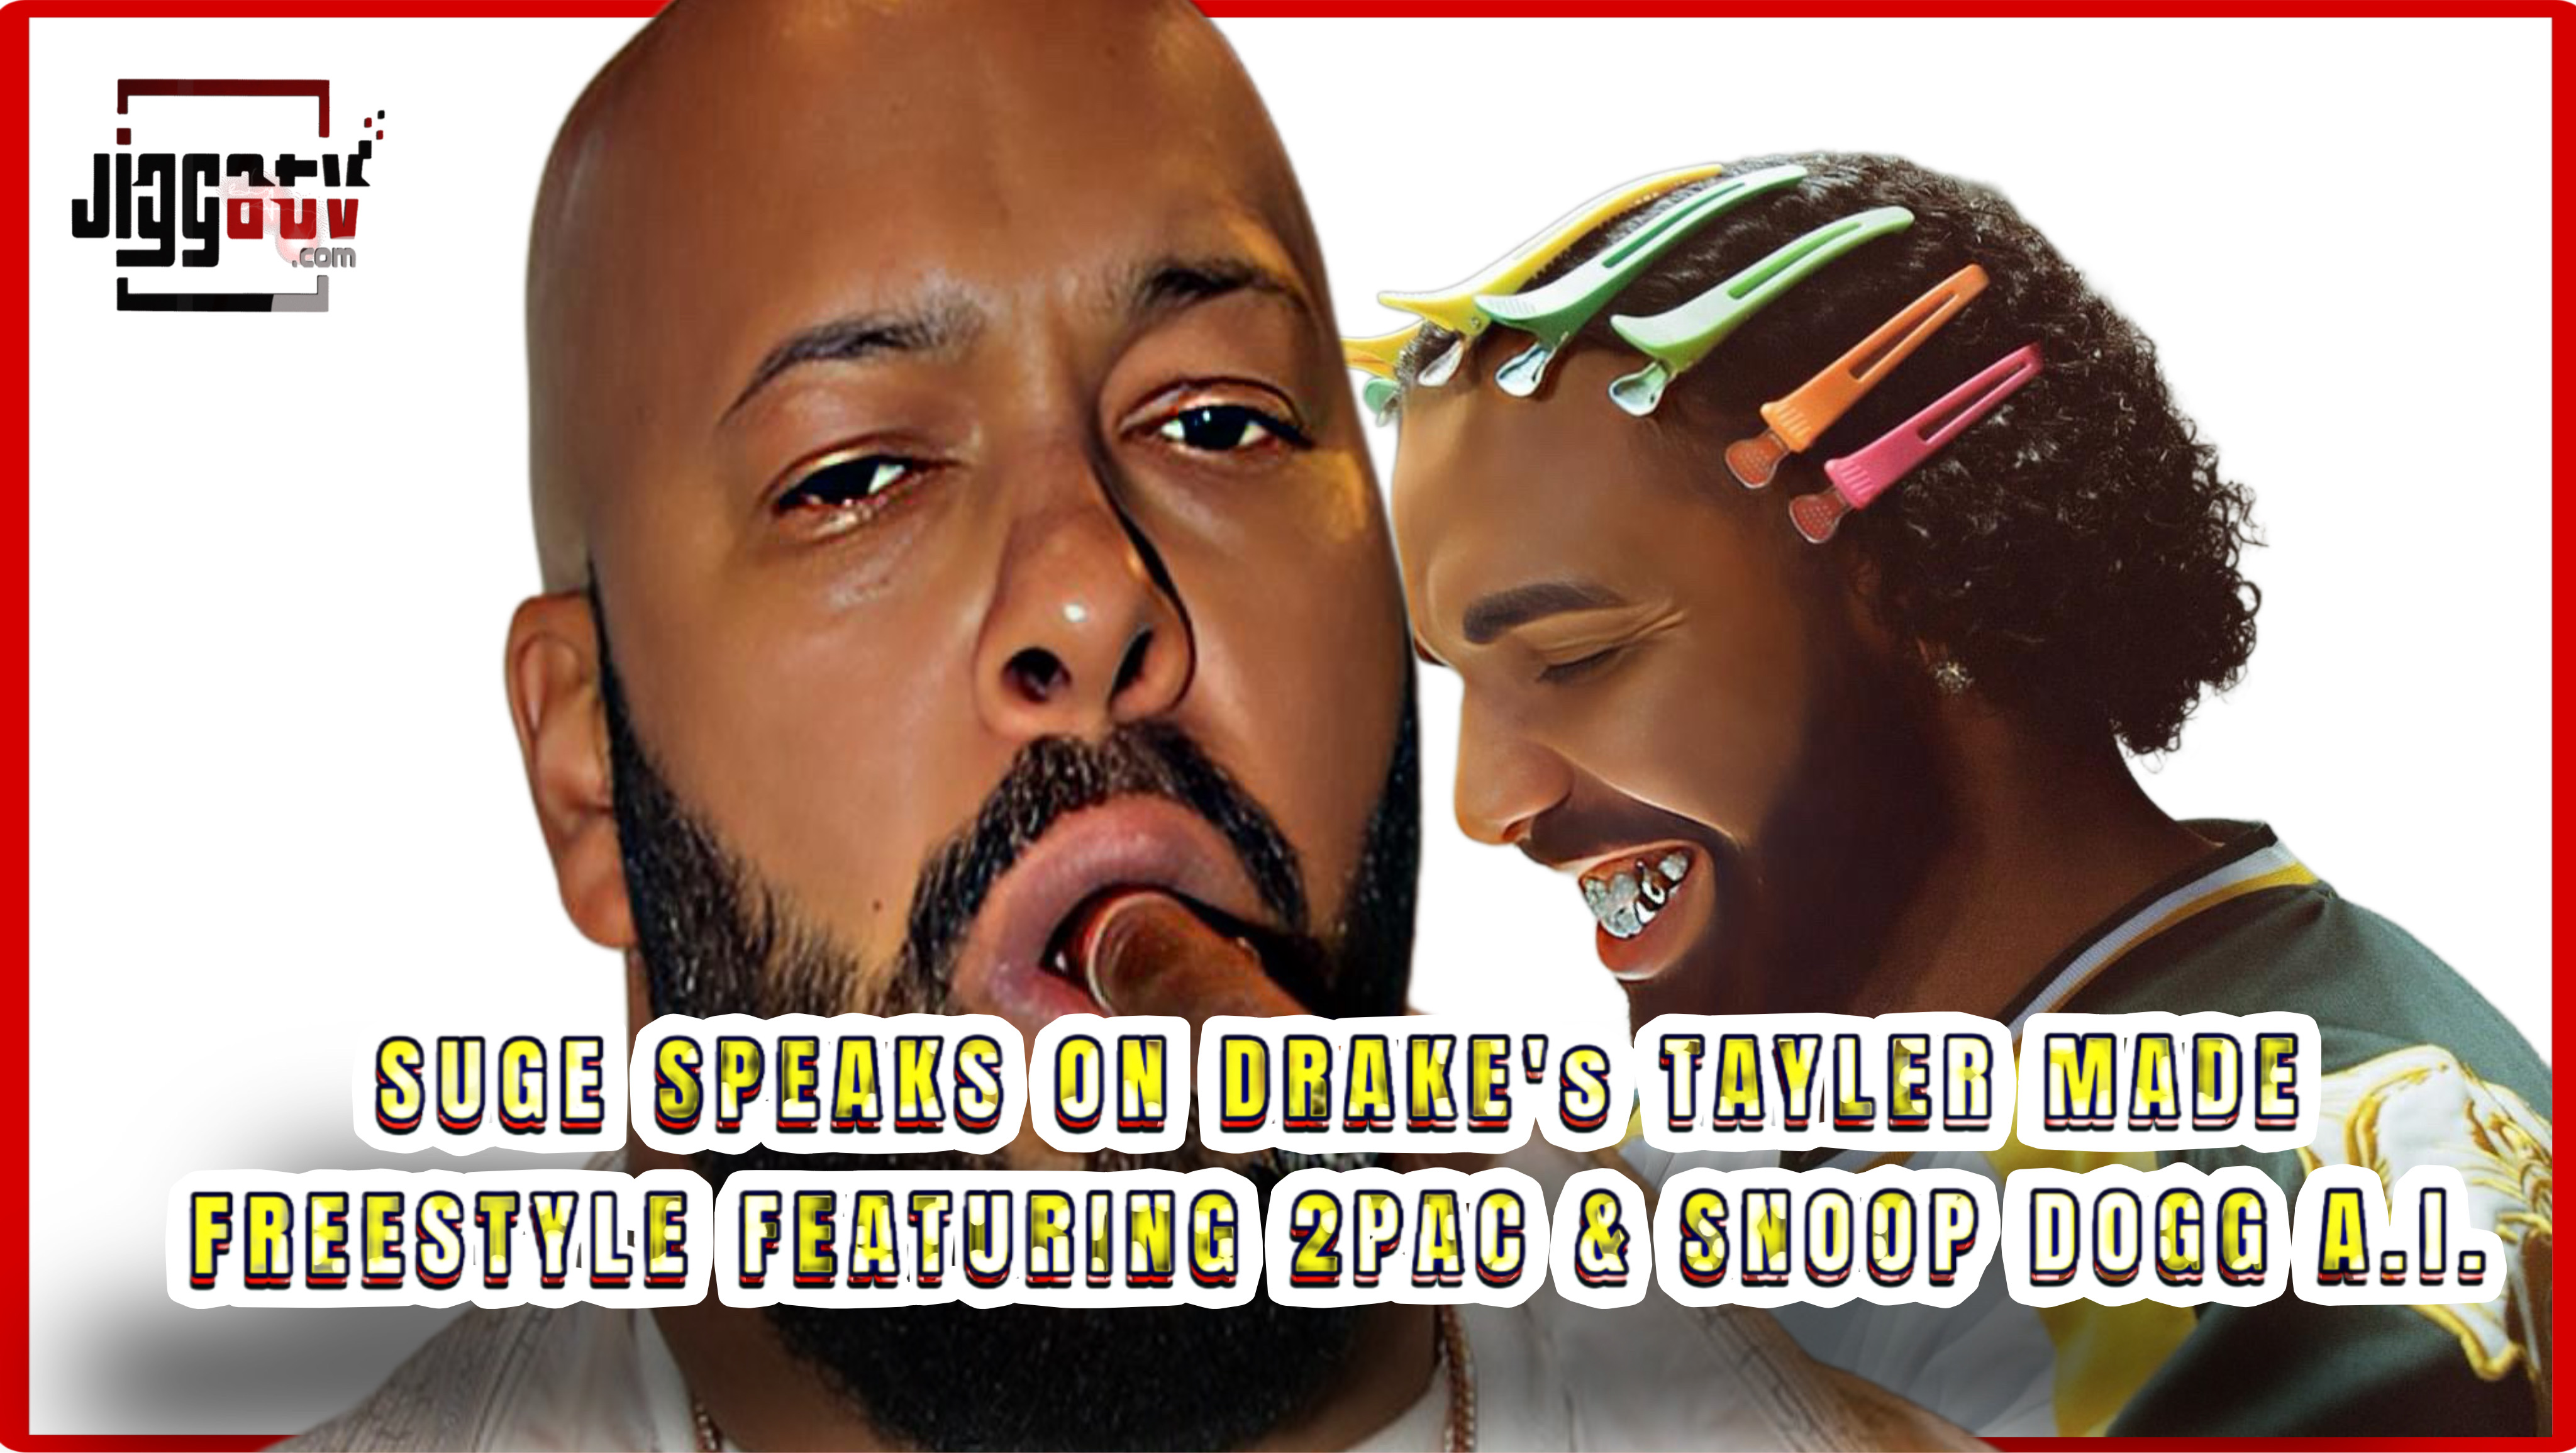 Suge Speaks On Drake’s Taylor Made Freestyle Featuring 2Pac  Snoop Dogg A.I.🥷🏿 it’s ⬆️| comments⤵️ |